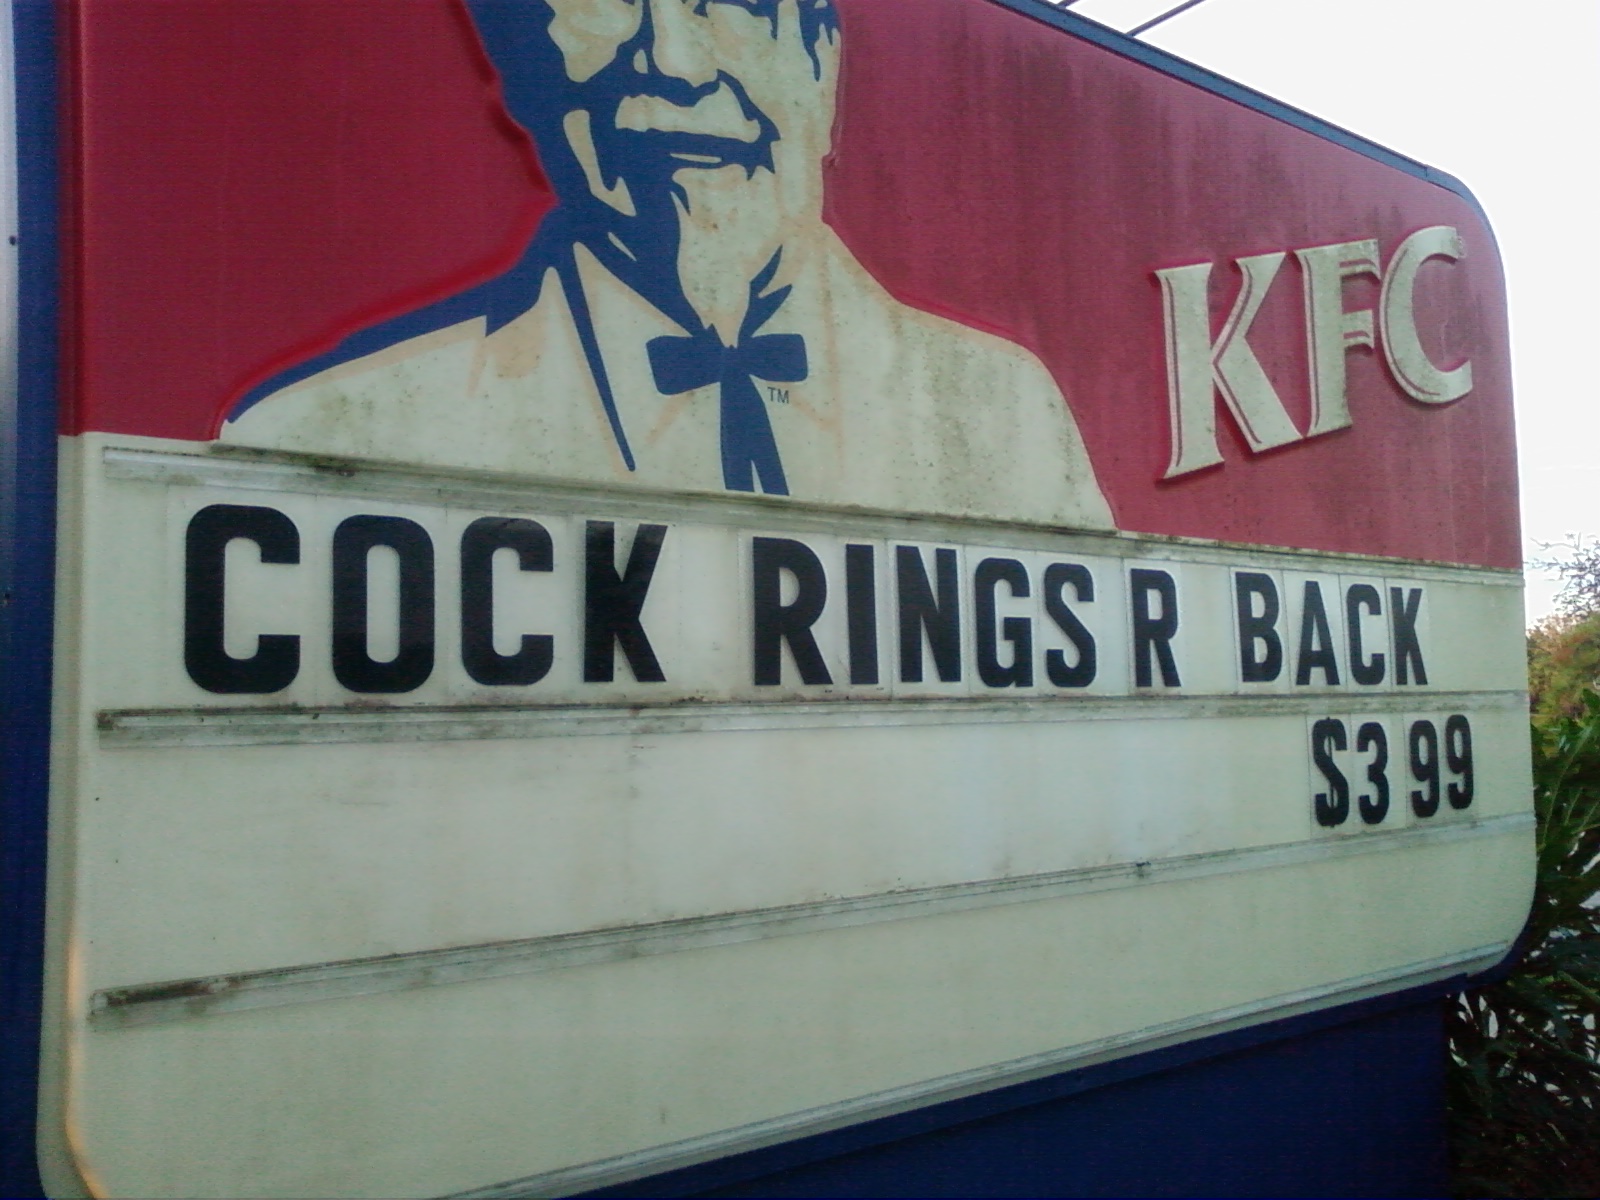 funny fast food sign - Kfc Cock Rings R Back S399